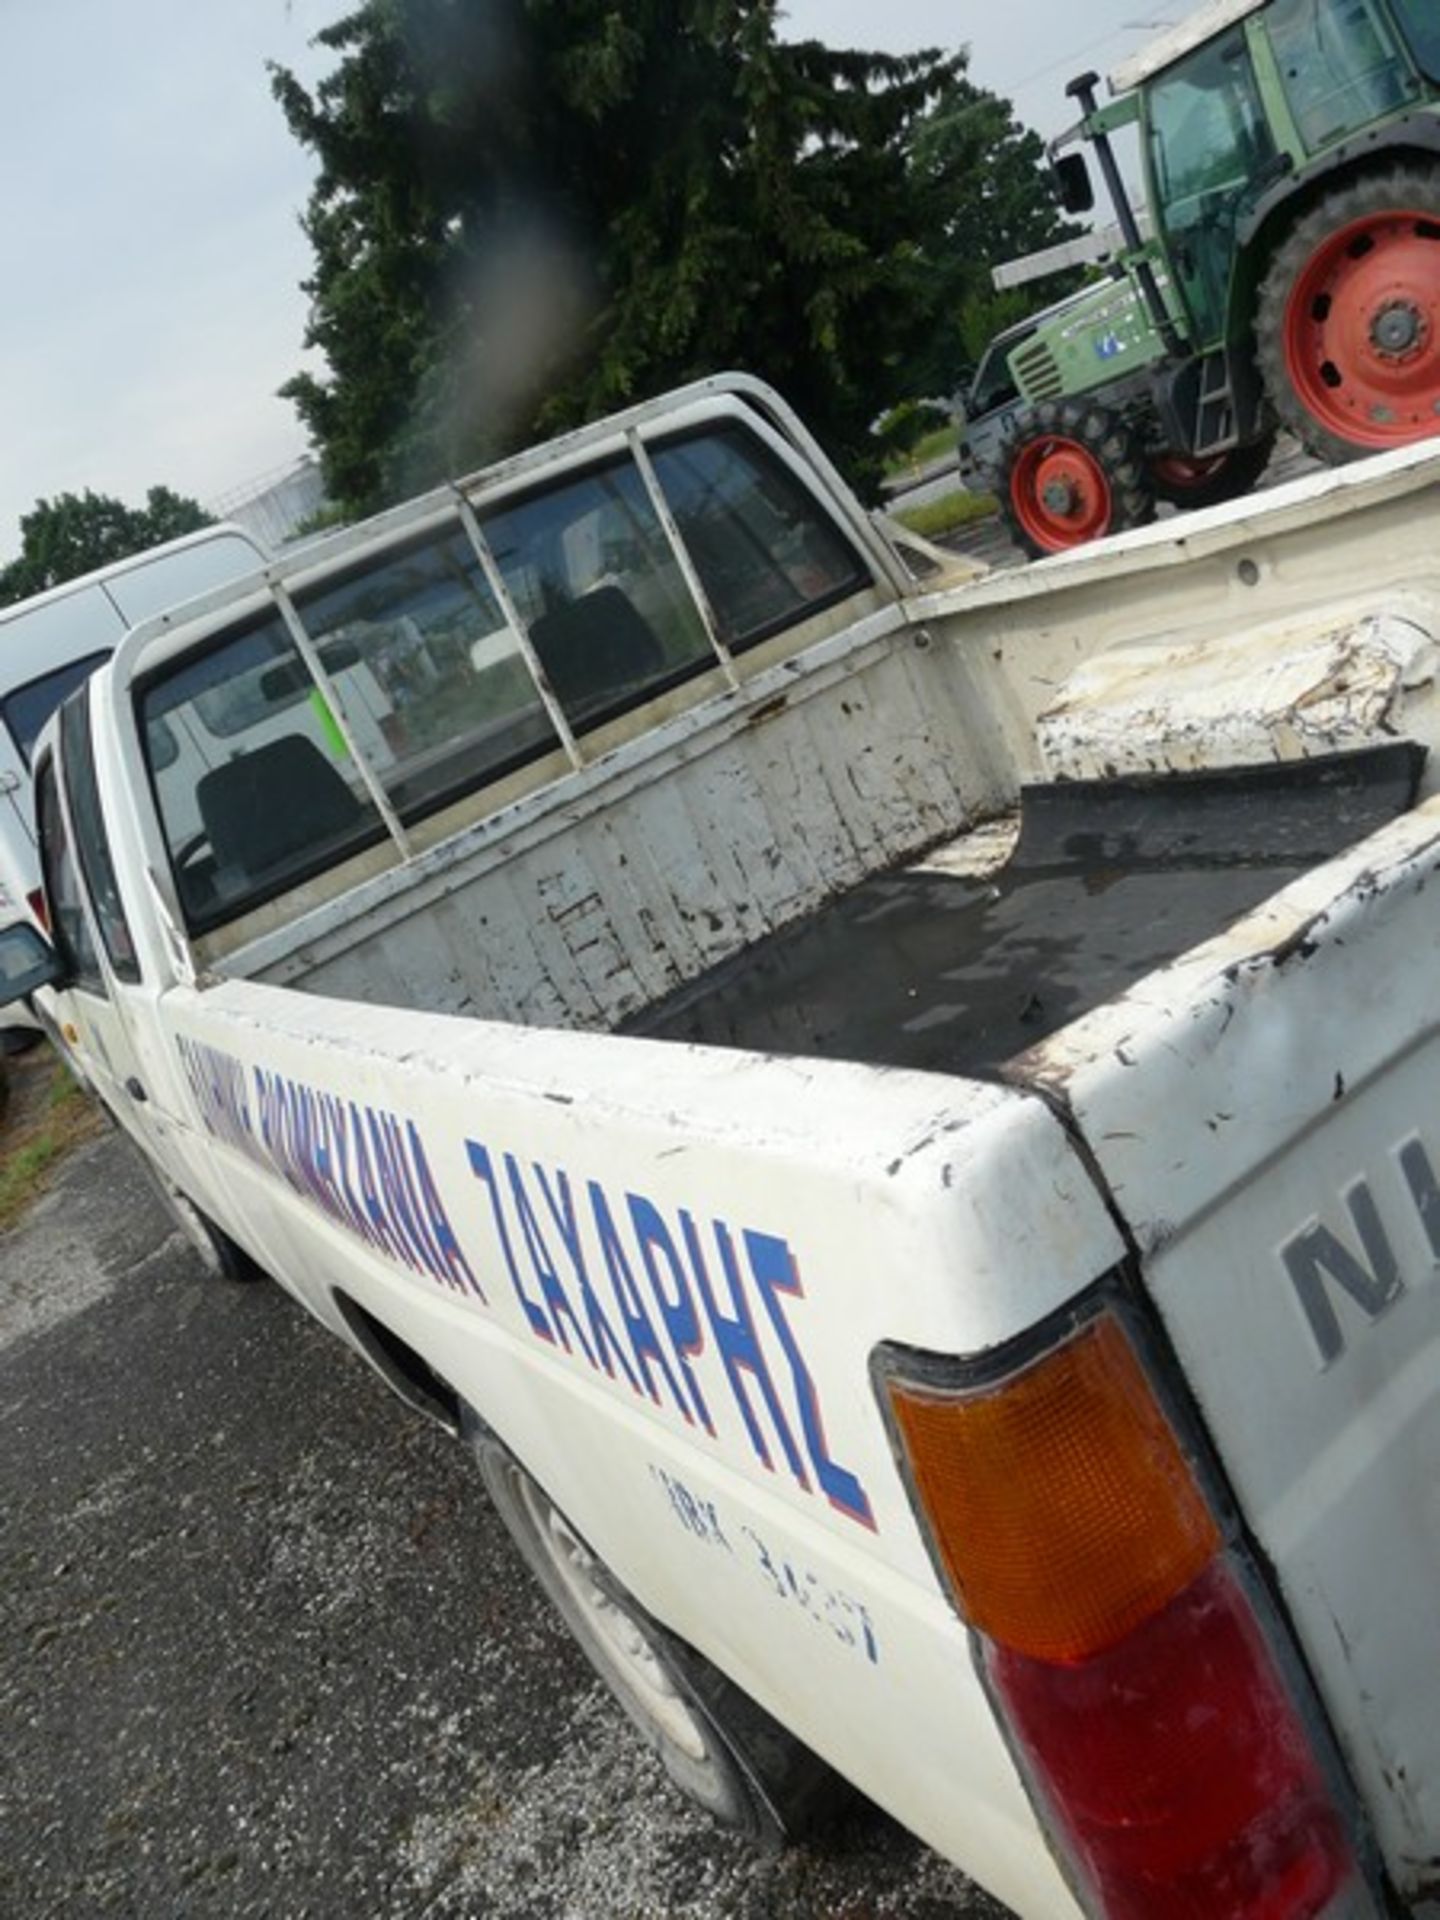 NISSAN KING CAB , REG: NBK 3437,PICK UP, PETROL ,KM 354381, WORKING CONDITION , MISSING BATTERY ( - Image 6 of 11